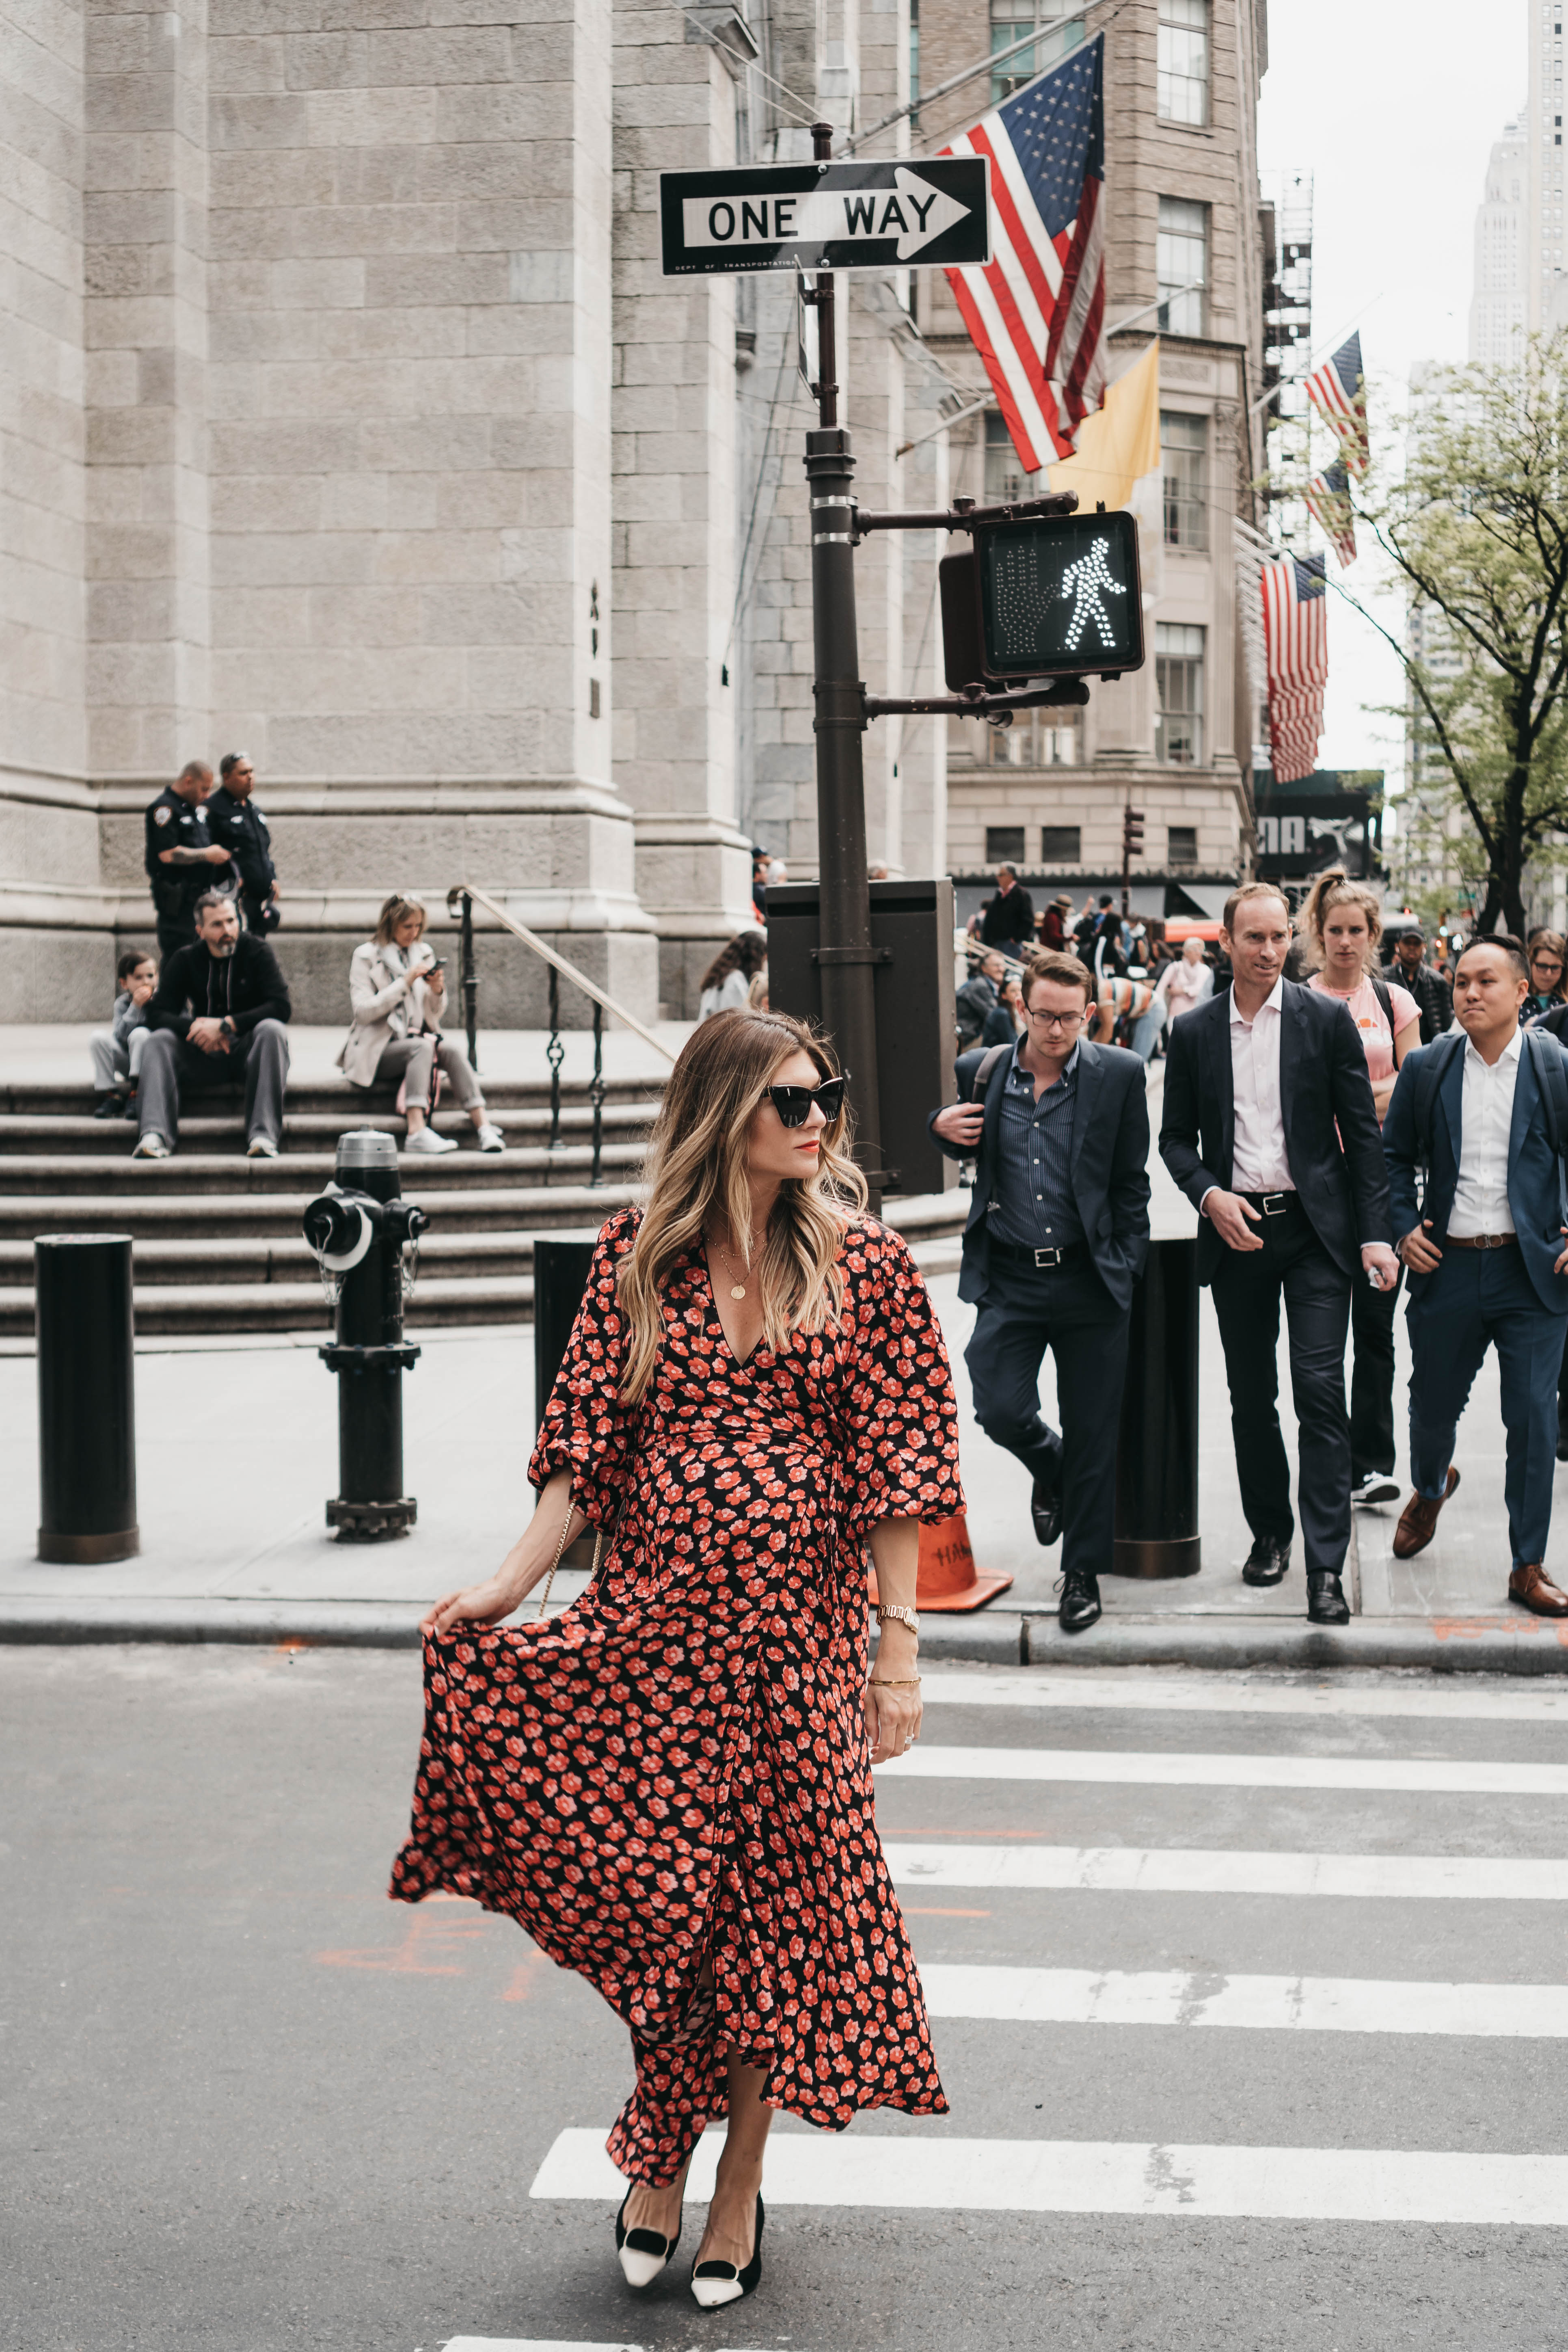 The Grey Edit - NYC Babymoon May- Ganni Red Floral Wrap Dress - 31 Weeks Pregnant - Midtown Manhattan Fifth Avenue